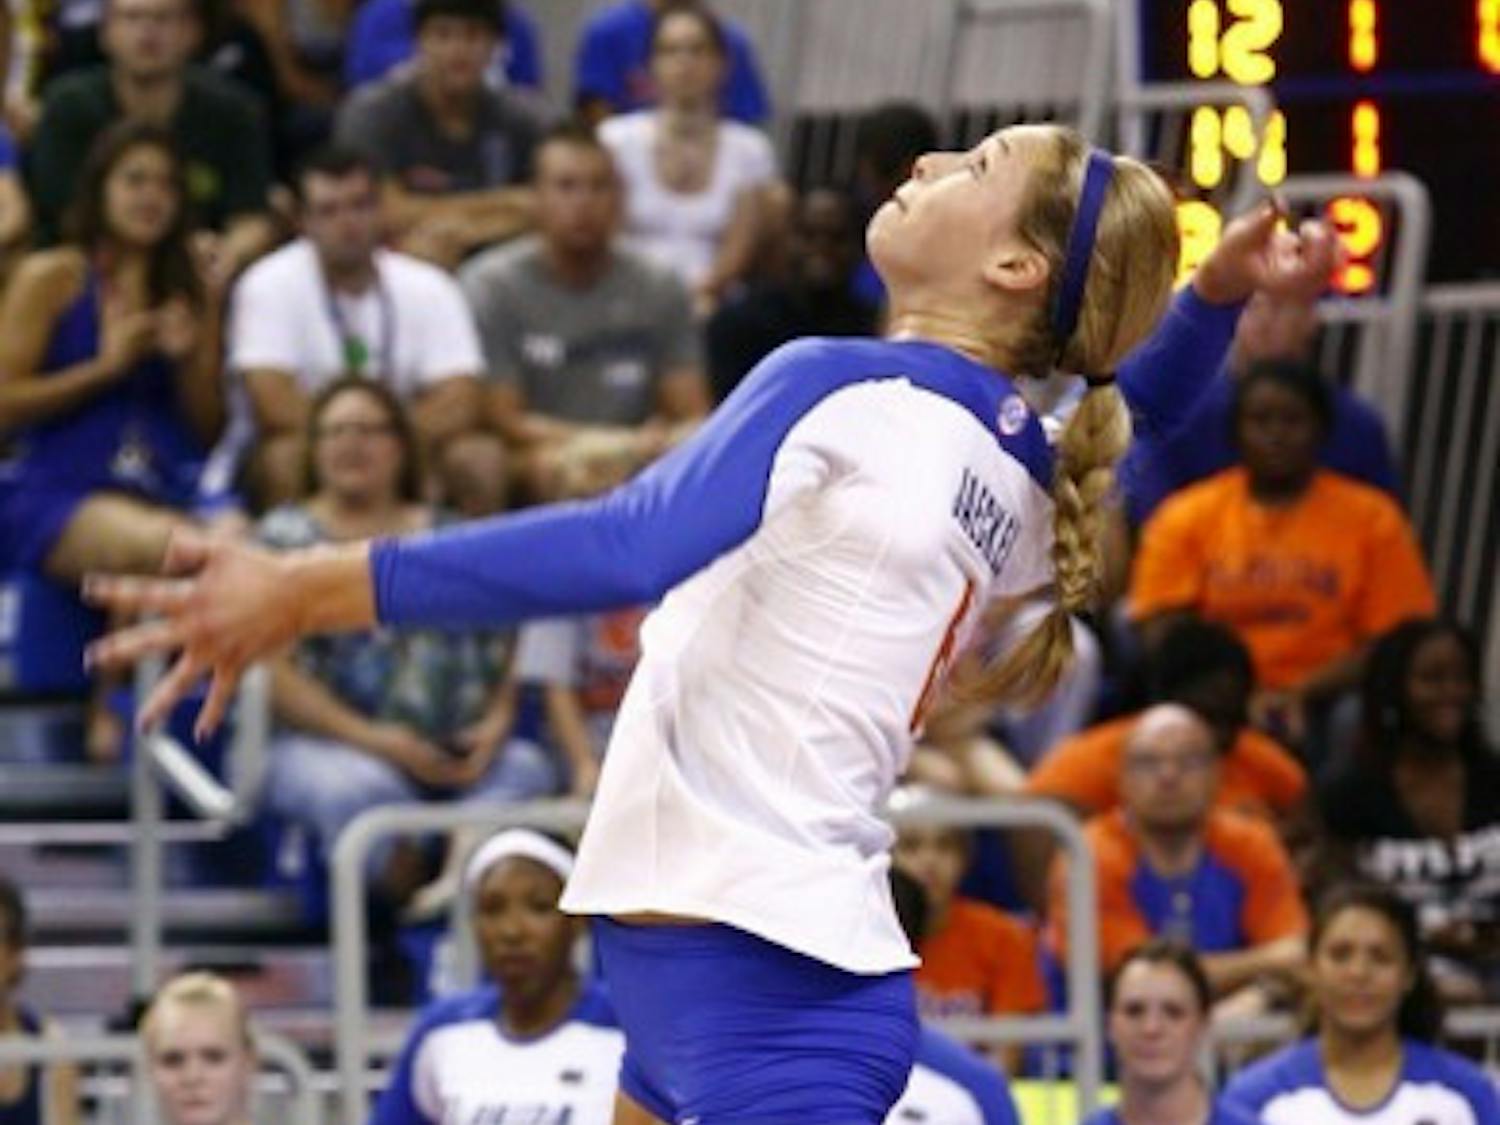 Senior outside hitter Kristy Jaeckel’s impressive serving performance helped lead the Gators to a come-from-behind second-set victory on Sunday.